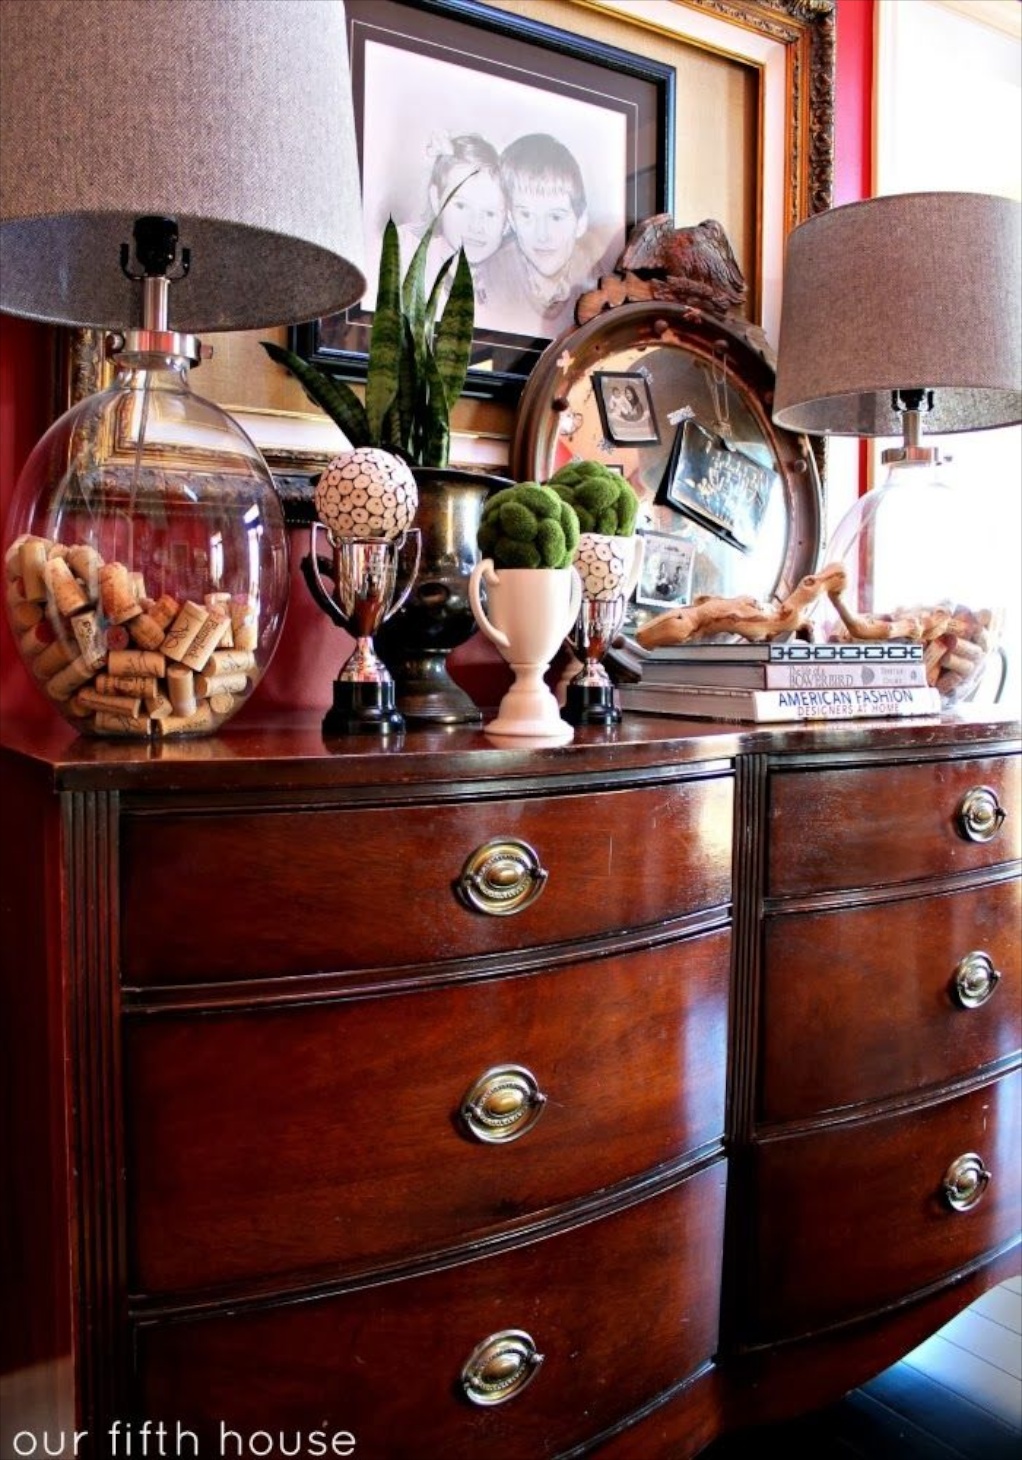 Master Bedroom Dresser Decor With A Theme